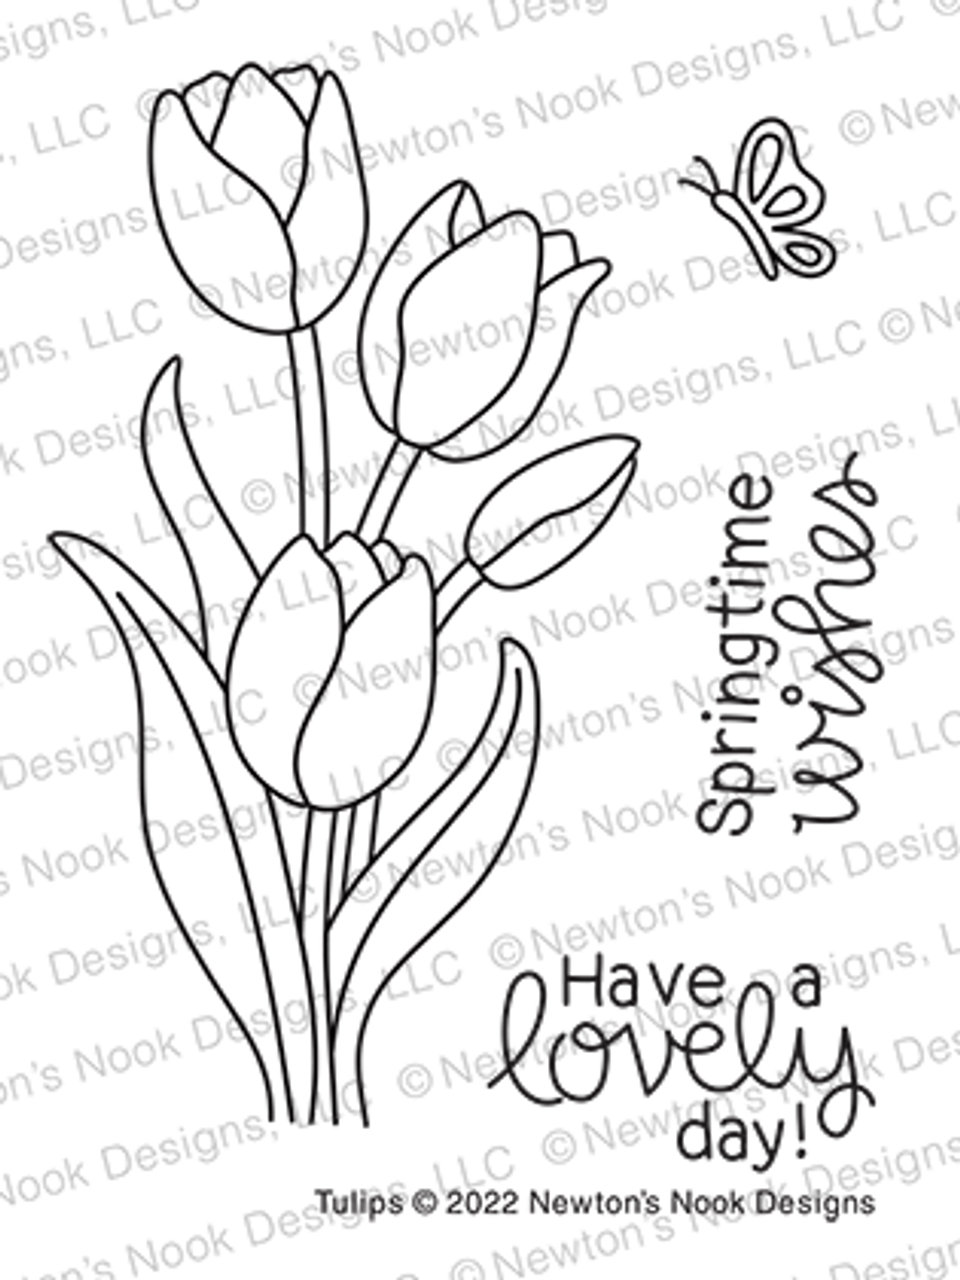 Easy Stocking Design Ideas You'll Love – Tulip Color Crafts